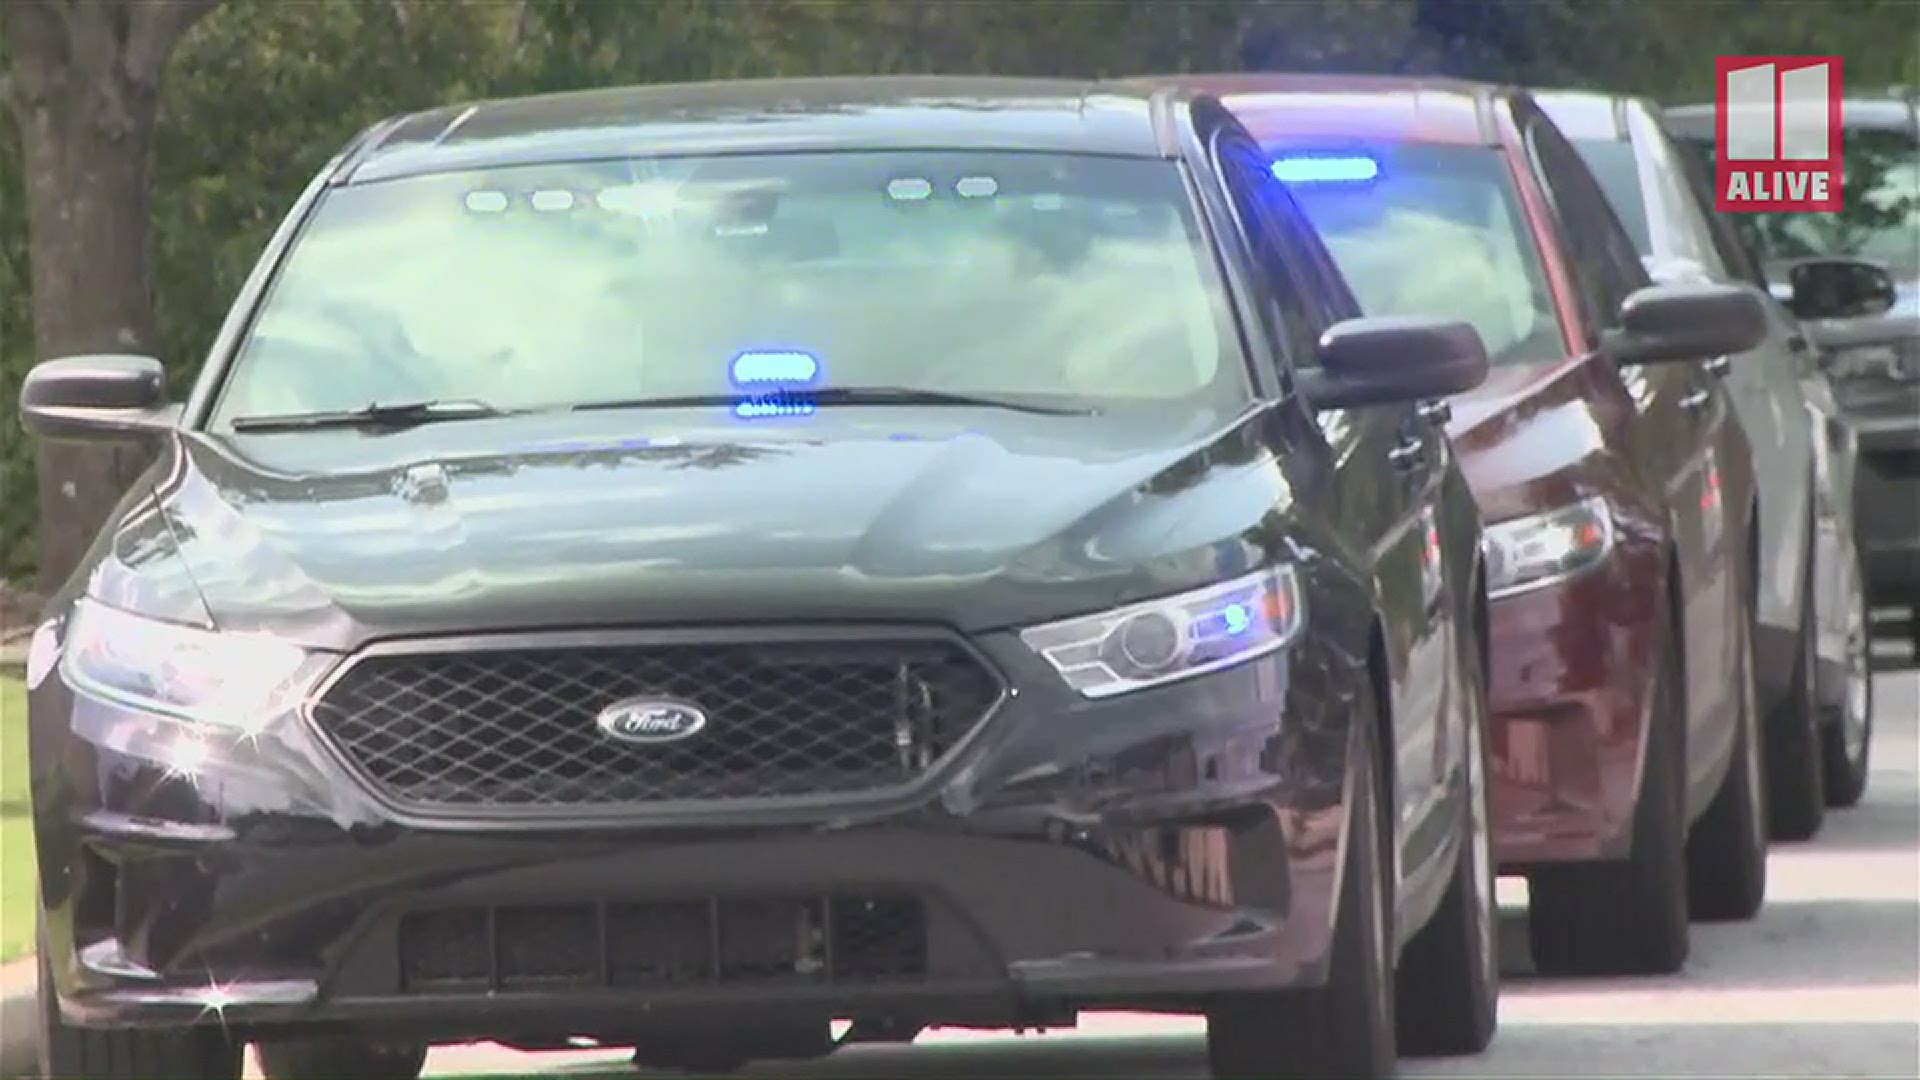 Gwinnett police said at least one person and a police K9 were hurt during an officer-involved shooting incident in Norcross on Thursday afternoon.